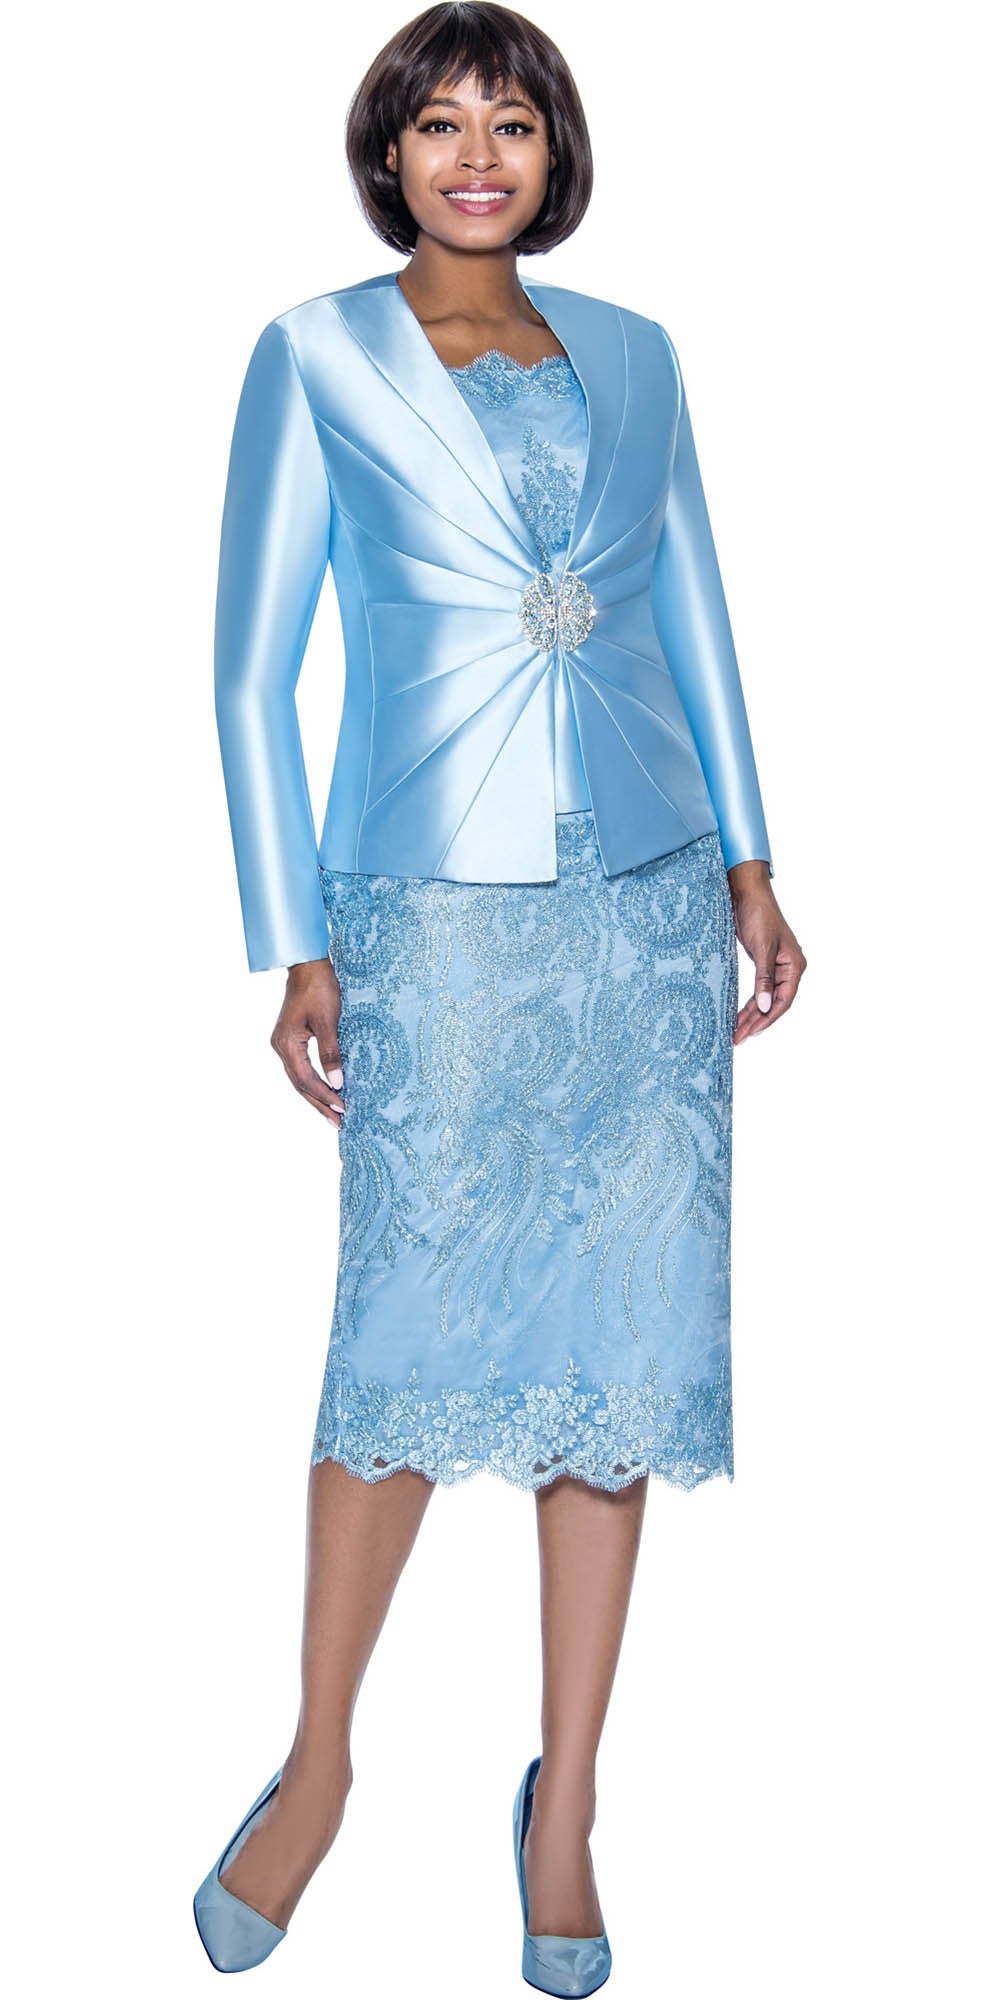 Terramina - 7817 - Blue - Embroidered Lace 3pc Skirt Suit